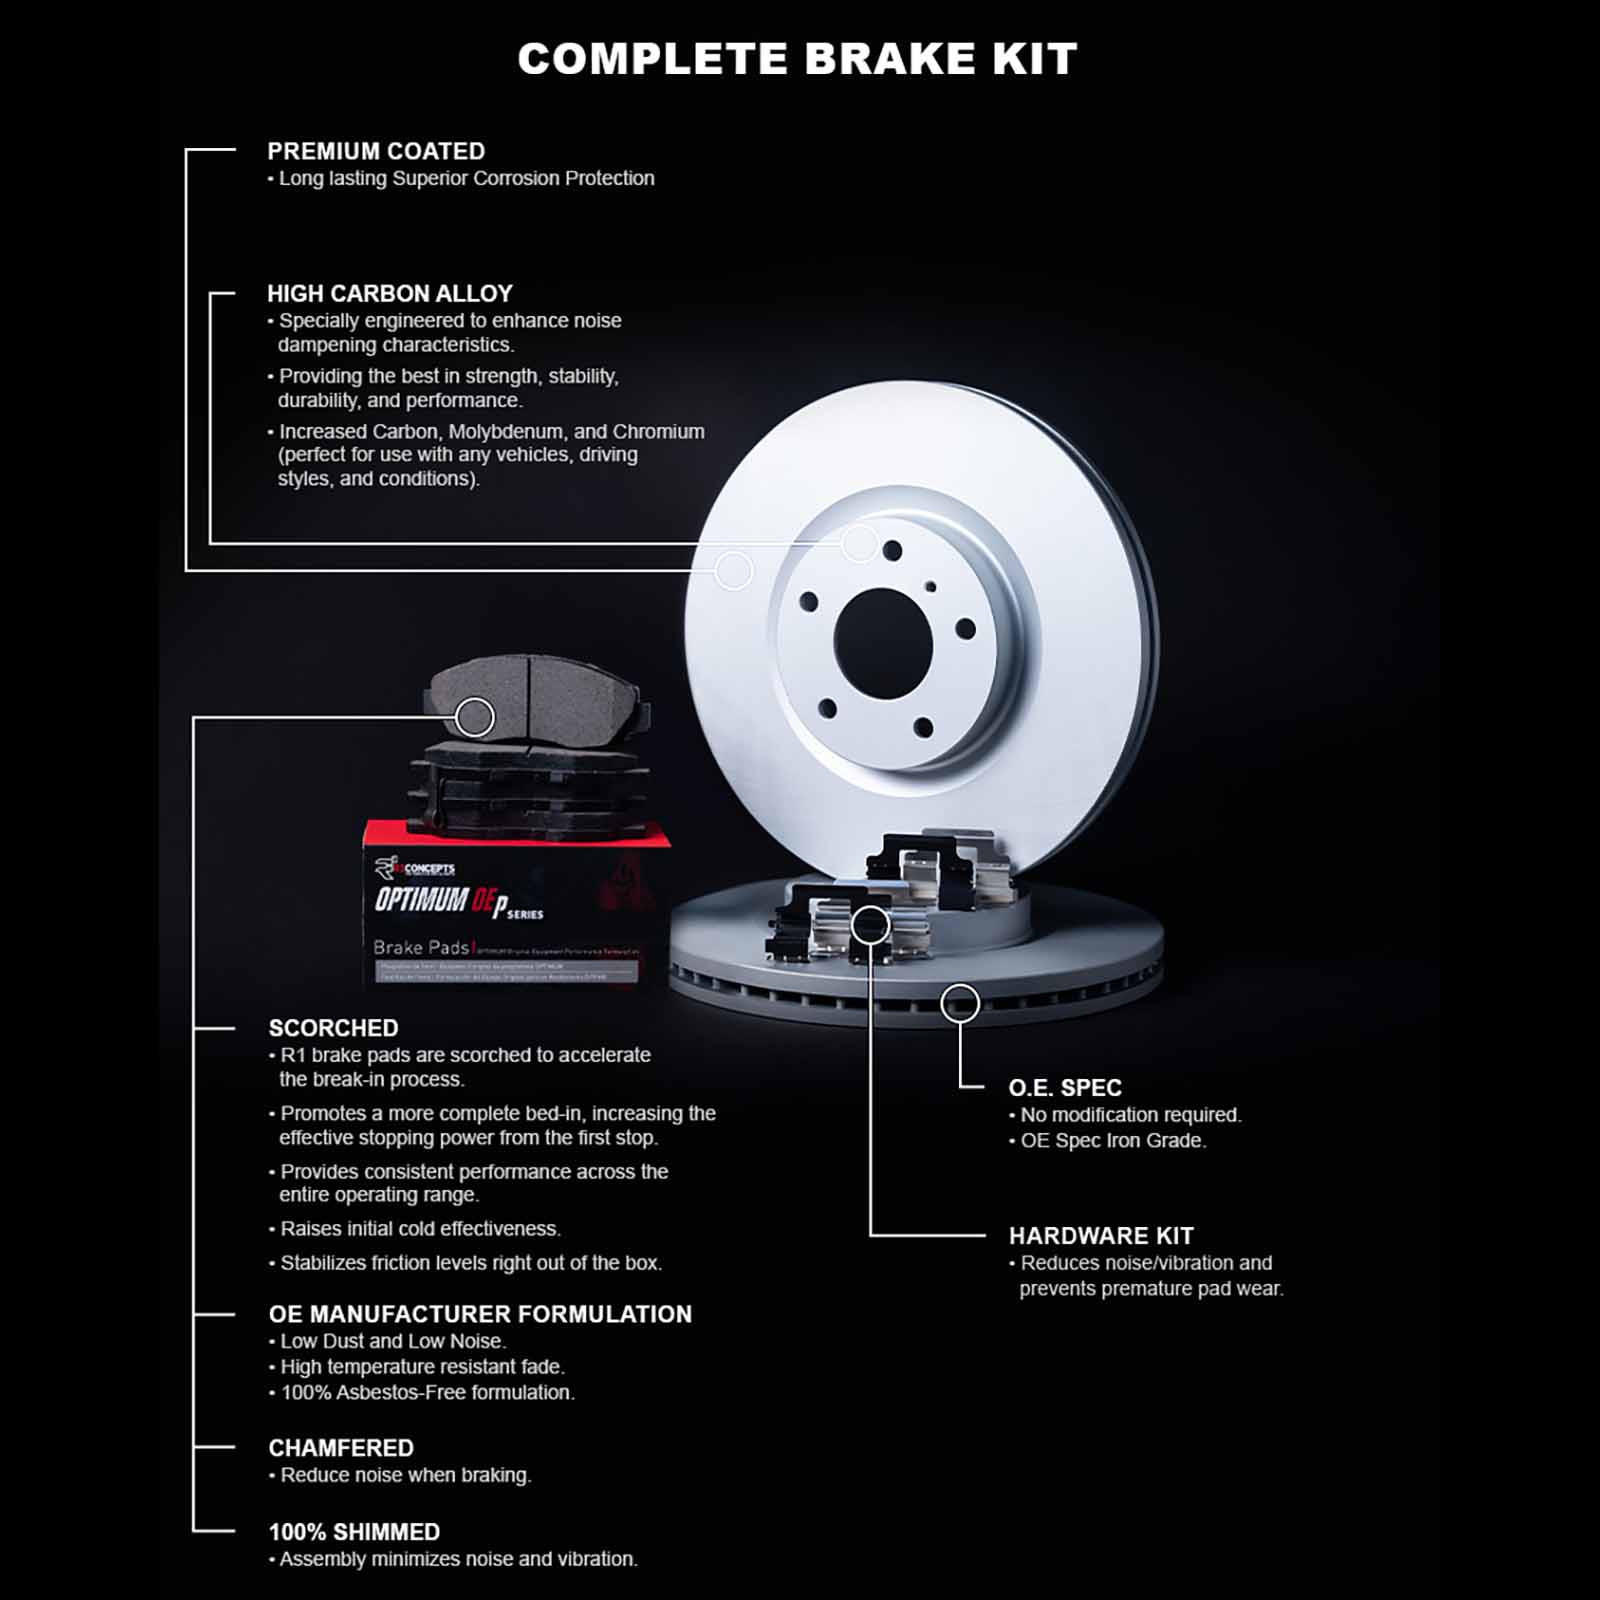 R1 Concepts WDUH1-63243 R1 Concepts Carbon Series Brake Rotors with 5000 Oep Brake Pads & Hdw